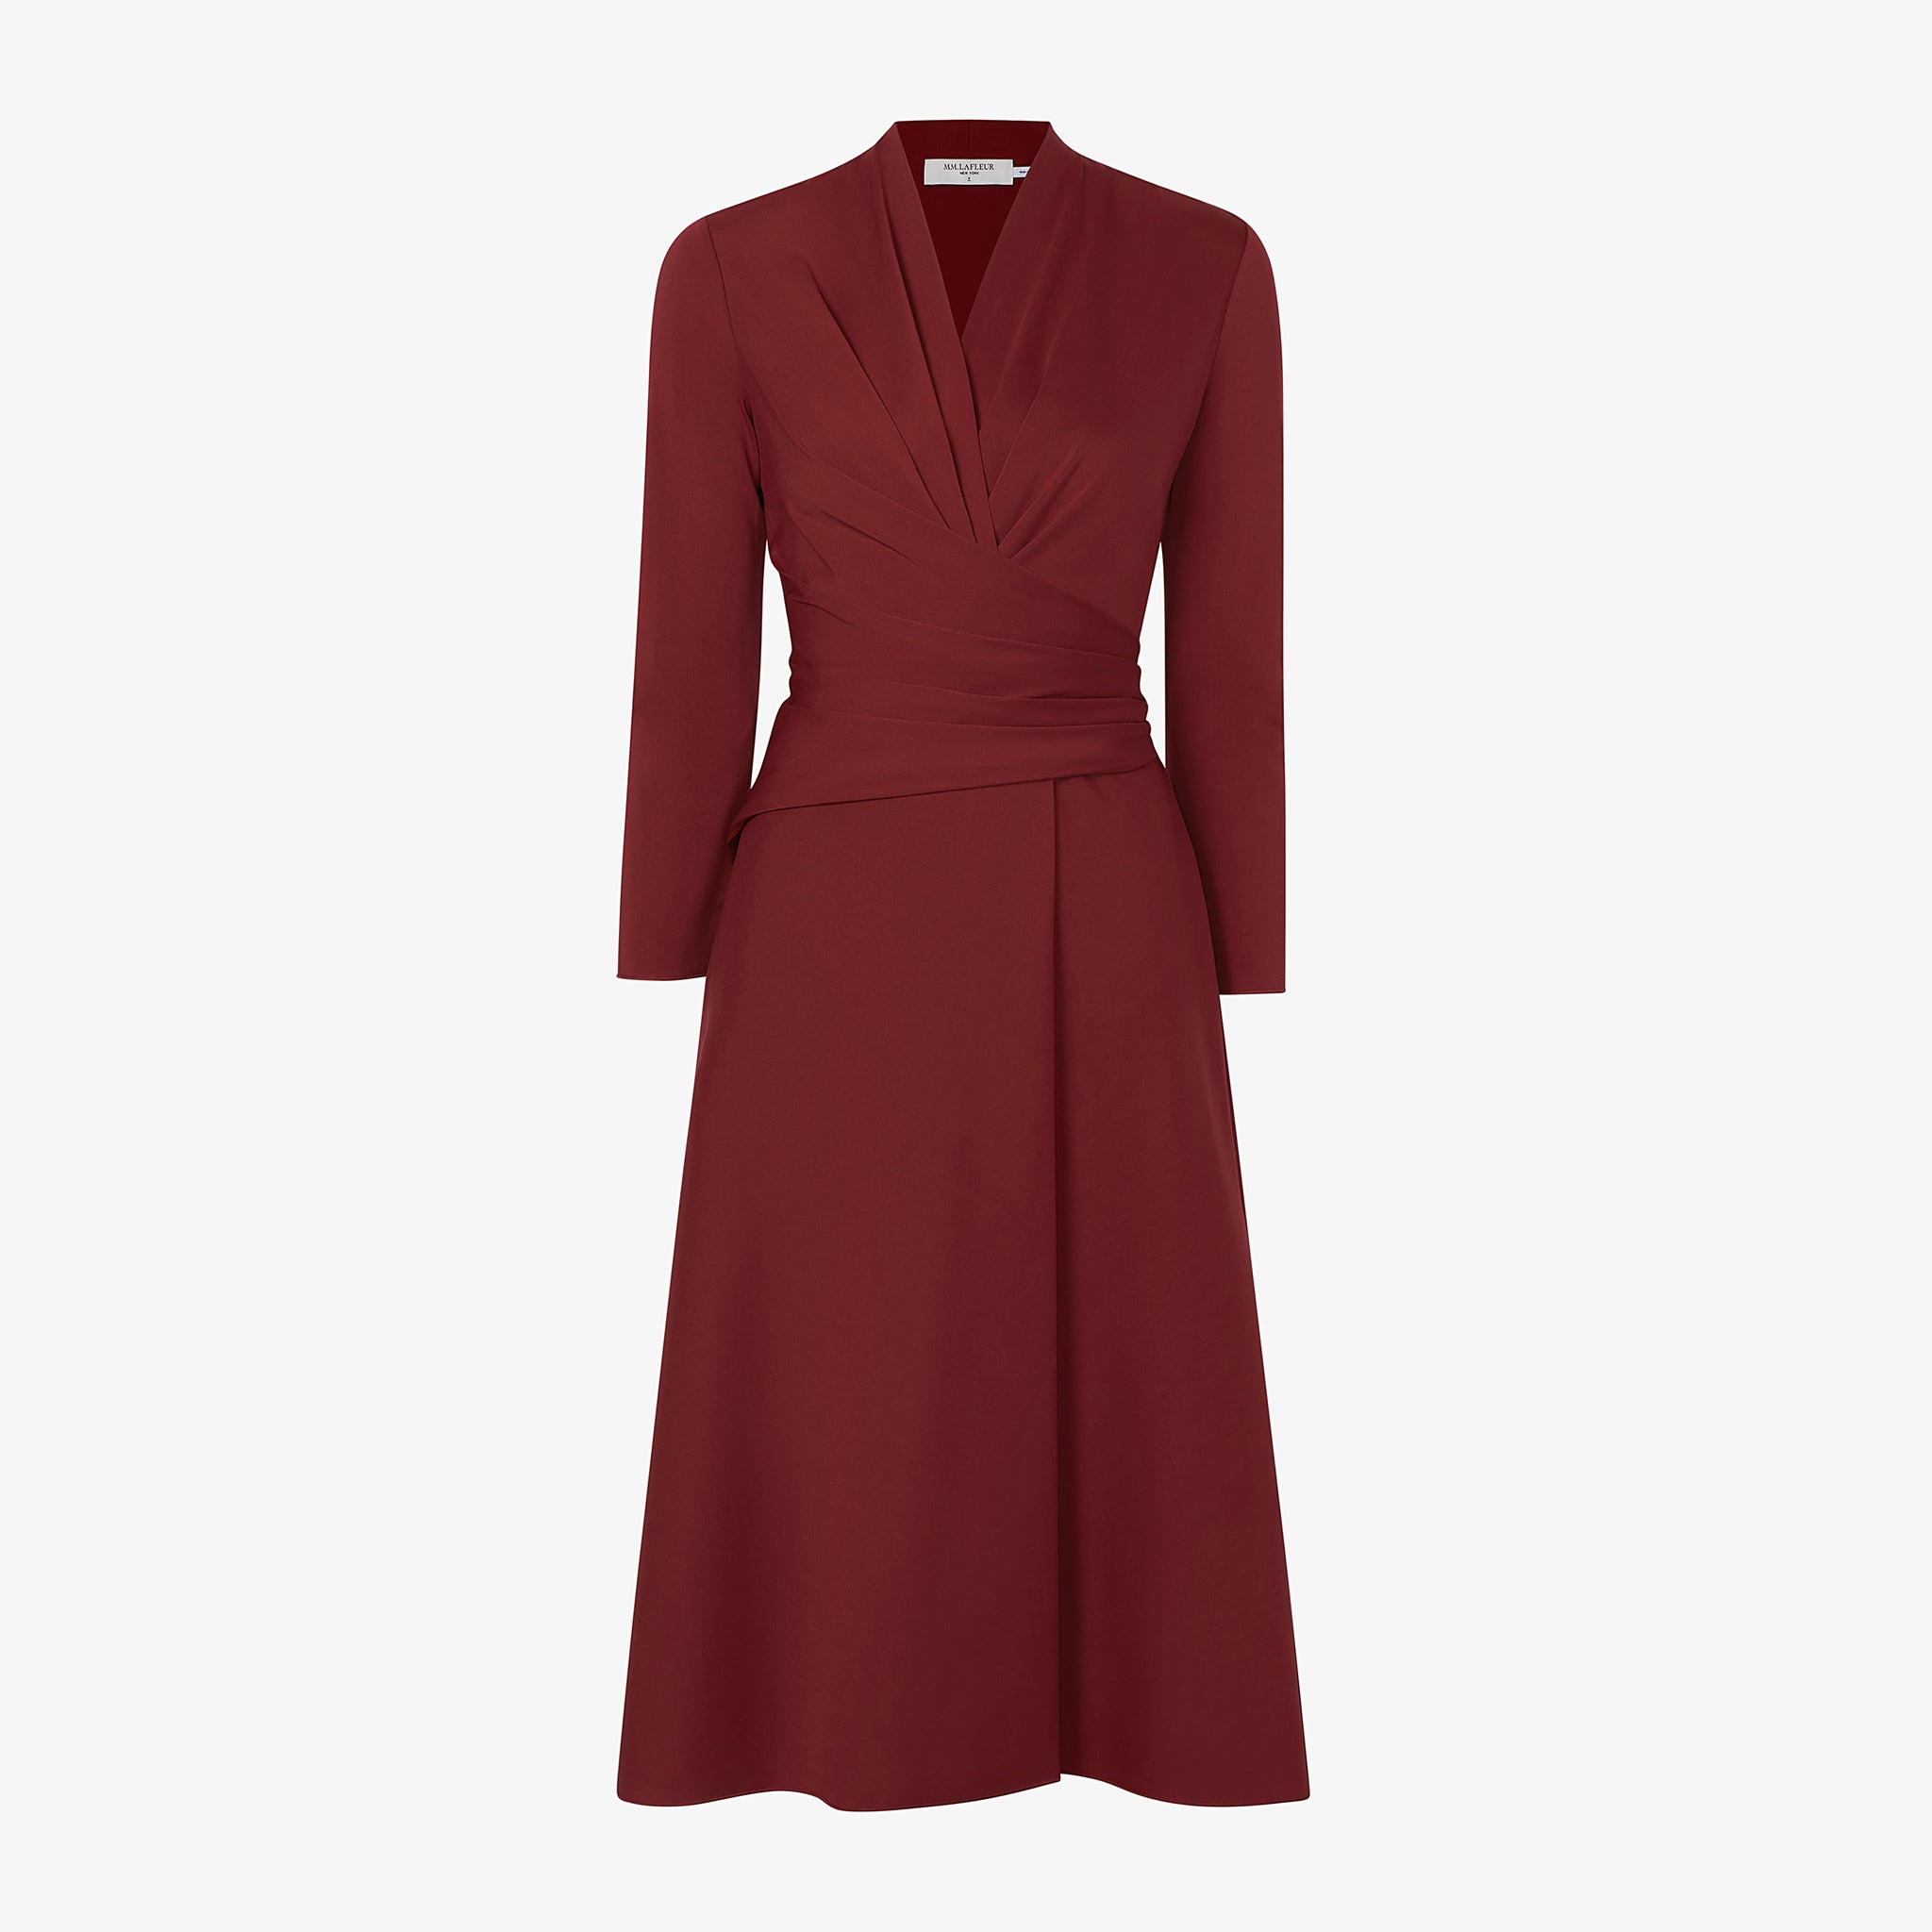 Packshot image of the carly dress in maroon